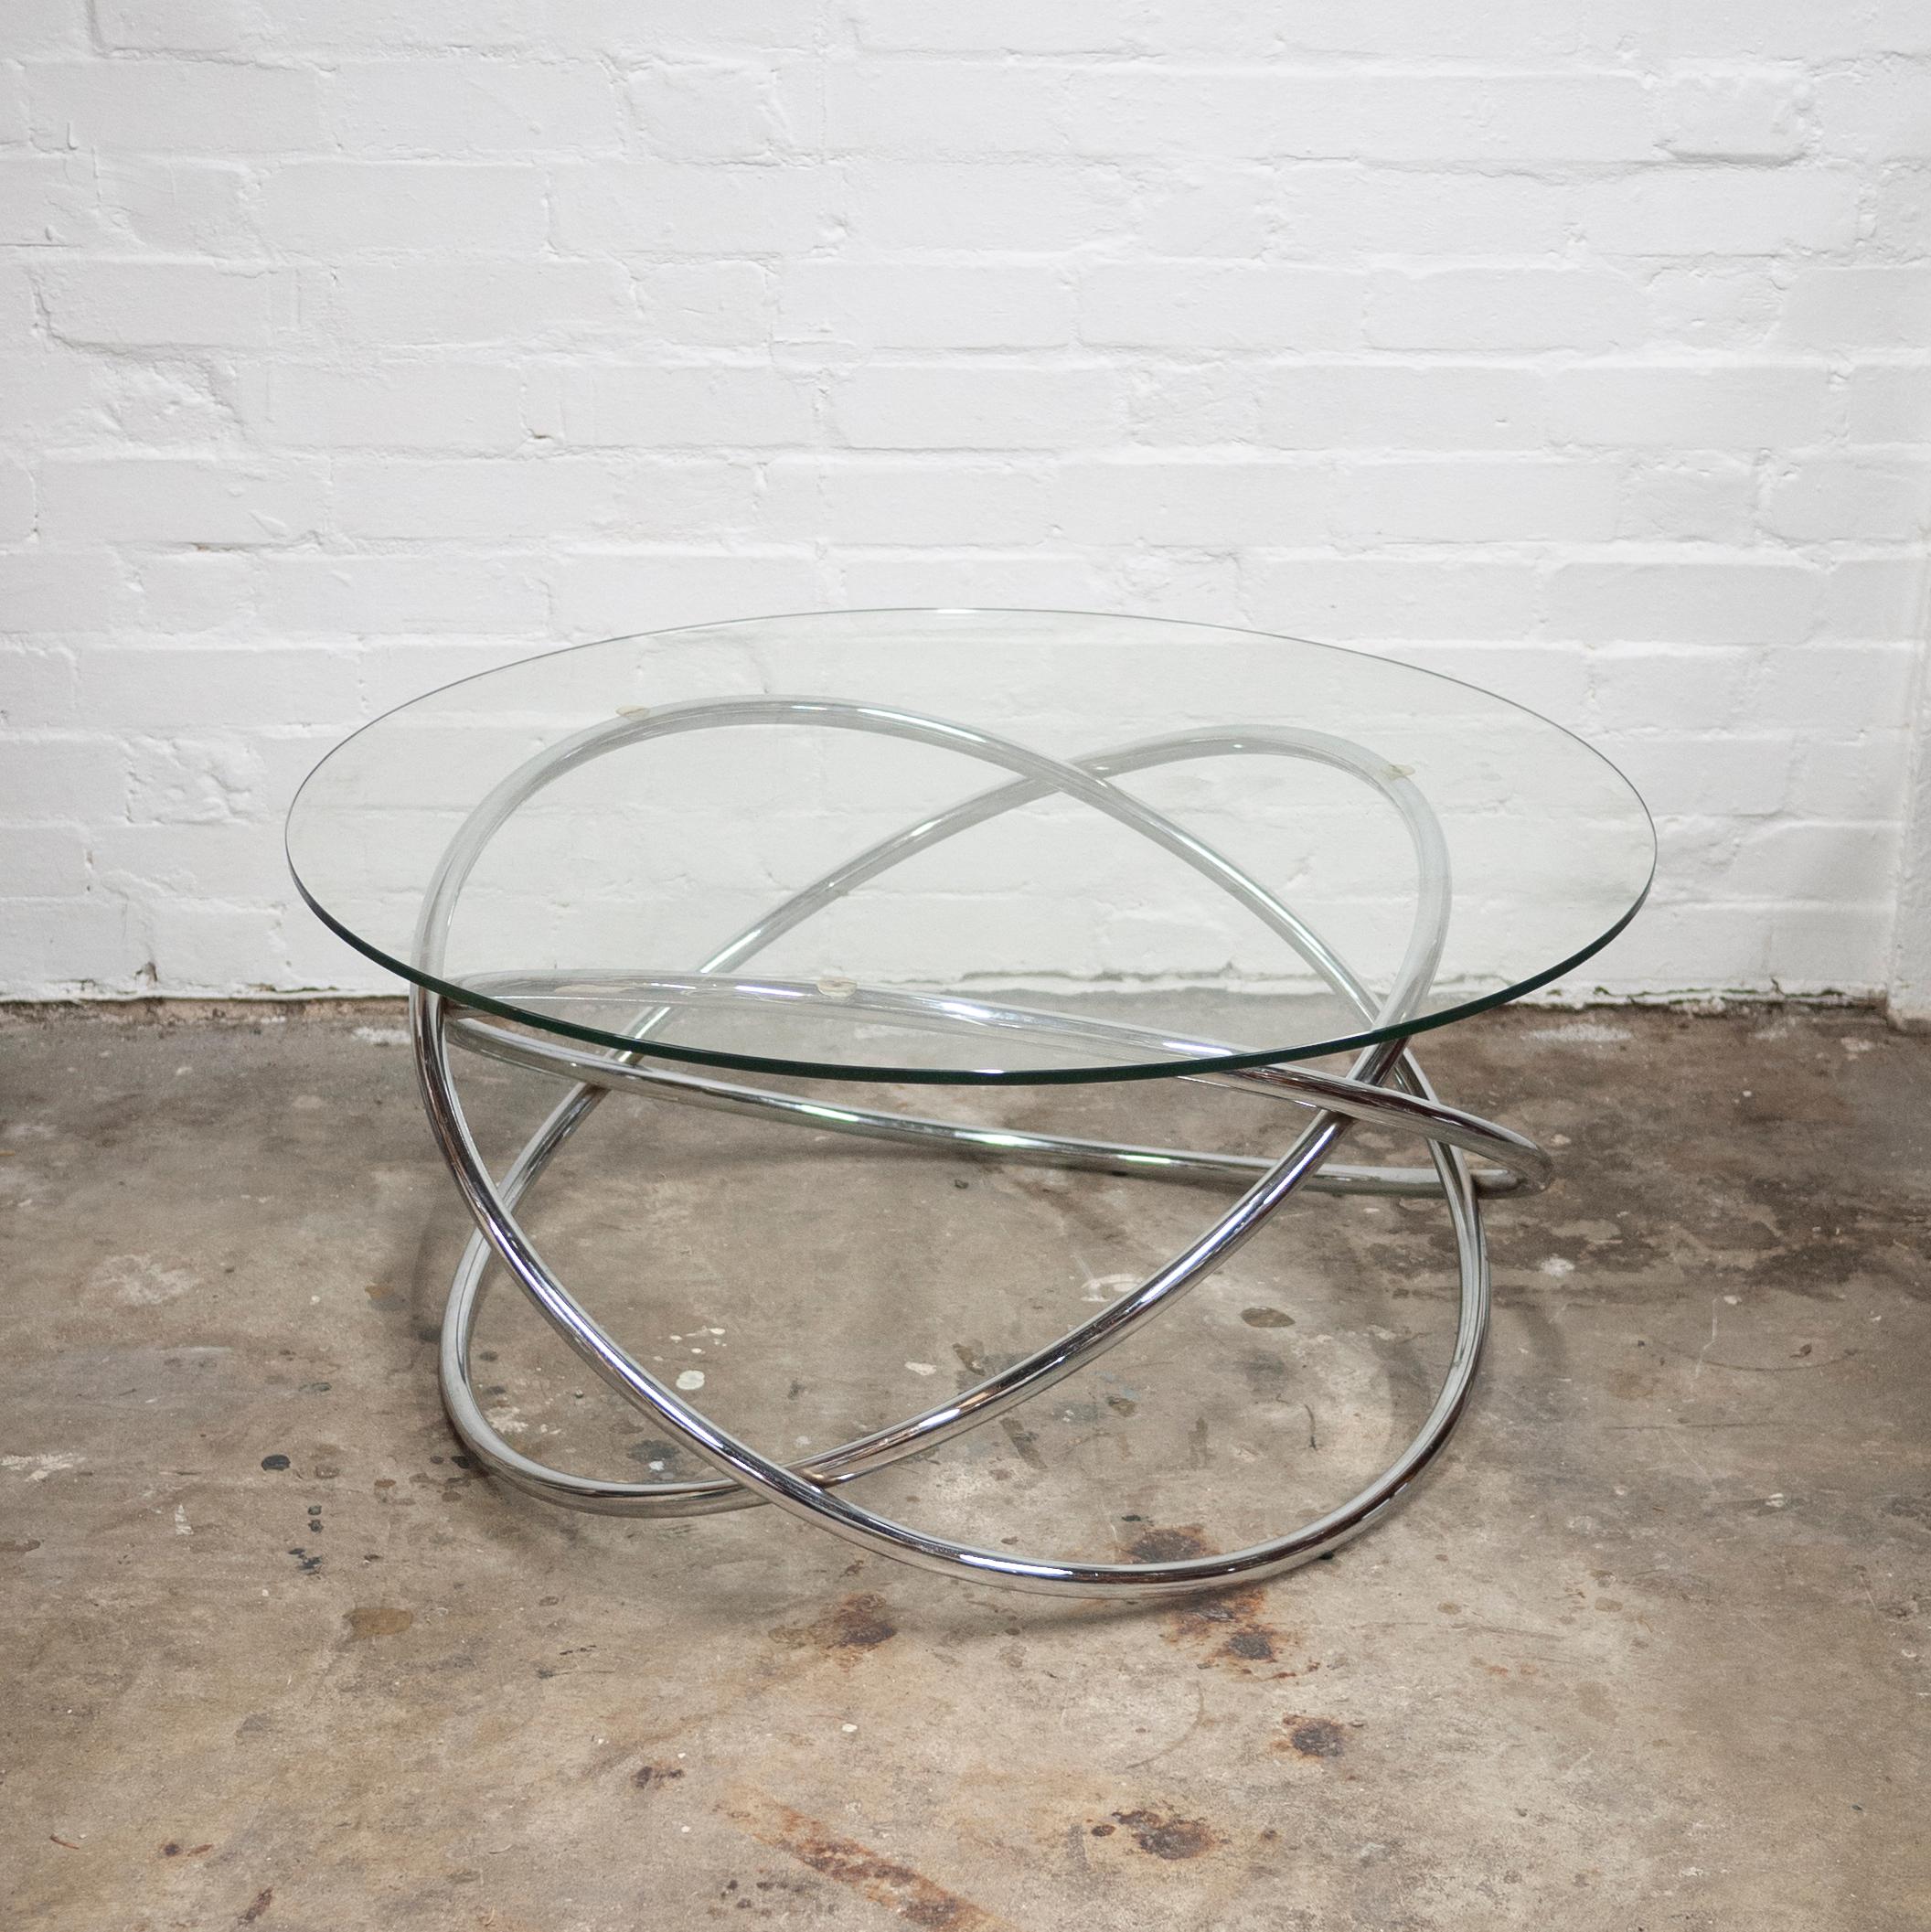 A glass and tubular metal coffee table with a spiral pedestal base in a Space Age style.

Designer - Unknown

Design Period - 1970 to 1979

Style - Vintage, Space Age

Detailed Condition - Good with minimal defects.

Restoration and Damage